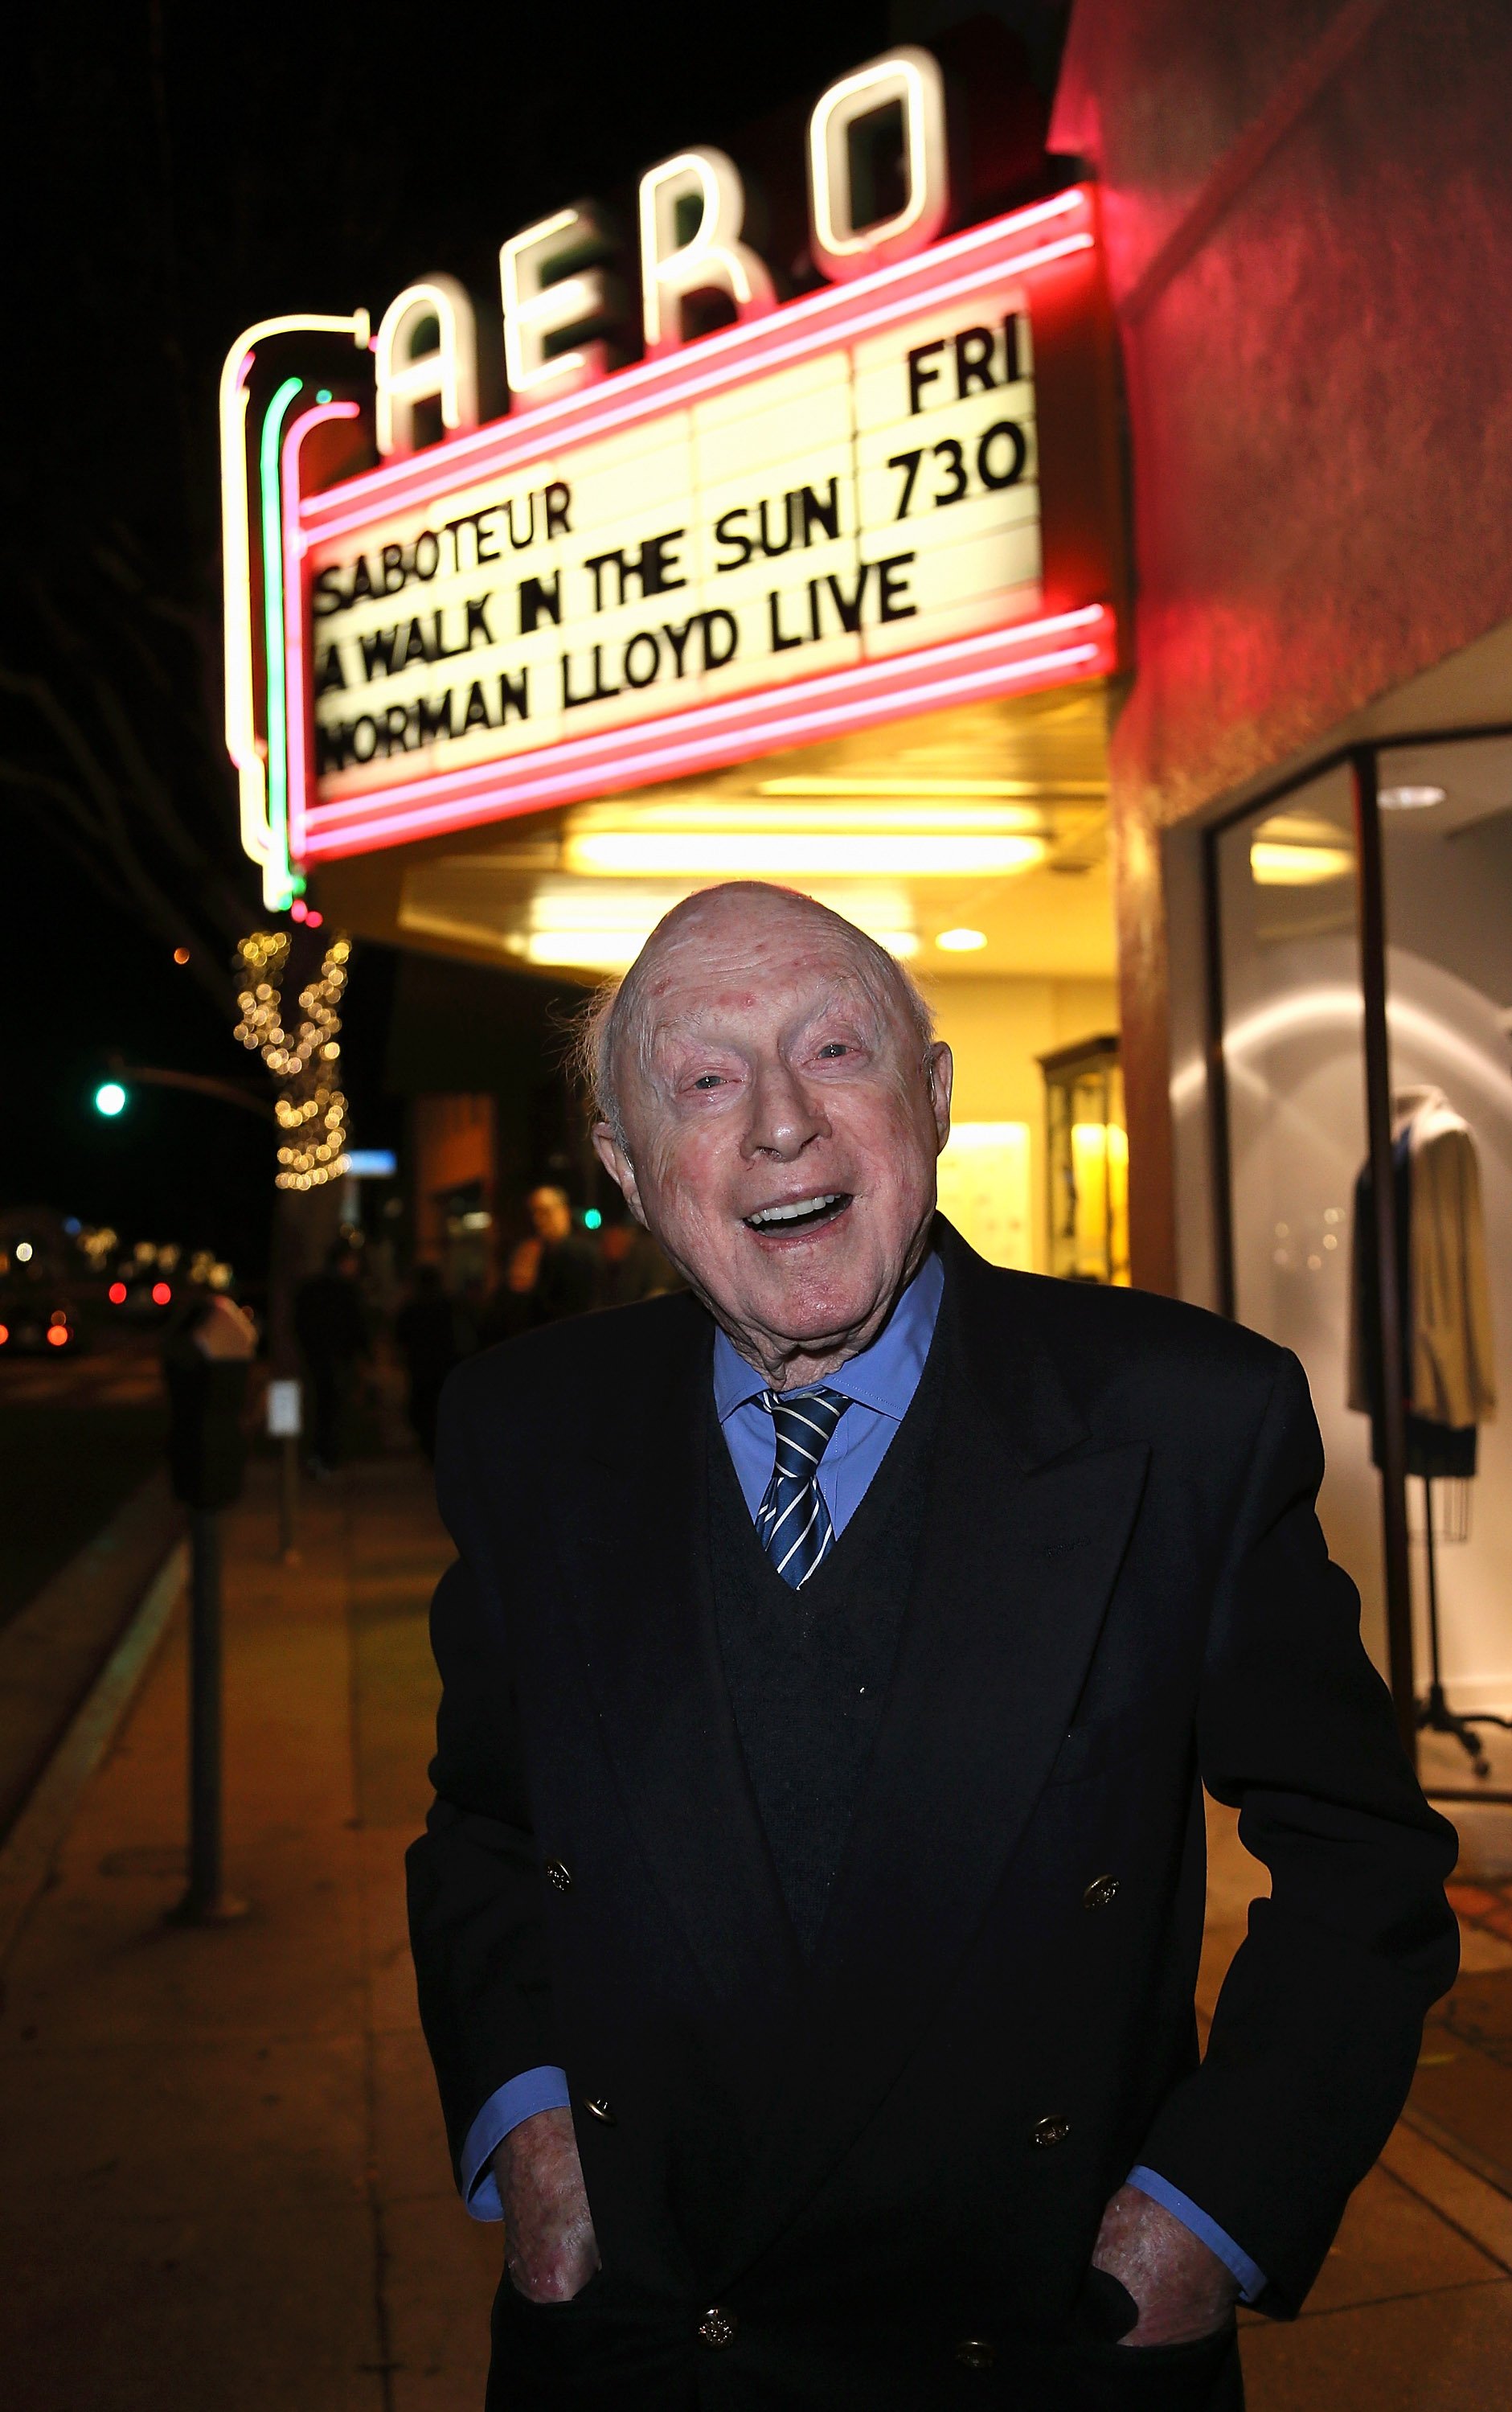 Norman Lloyd attends the American Cinematheque film series "100 Years of Norman Lloyd" Q&A at the Aero Theatre on November 21, 2014 in Santa Monica, California | Photo: Getty Images